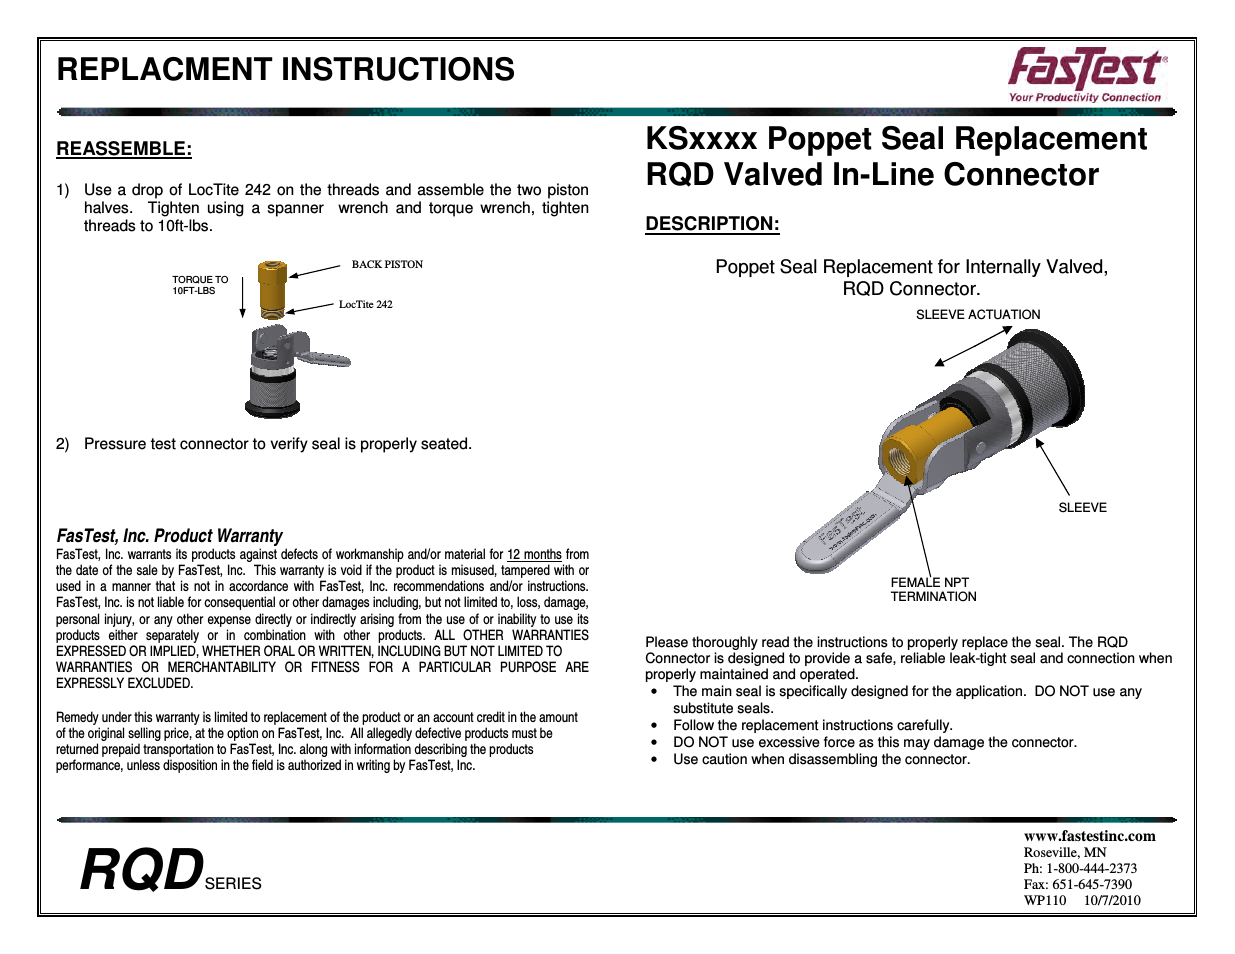 RQD Series Poppet Seal Replacement